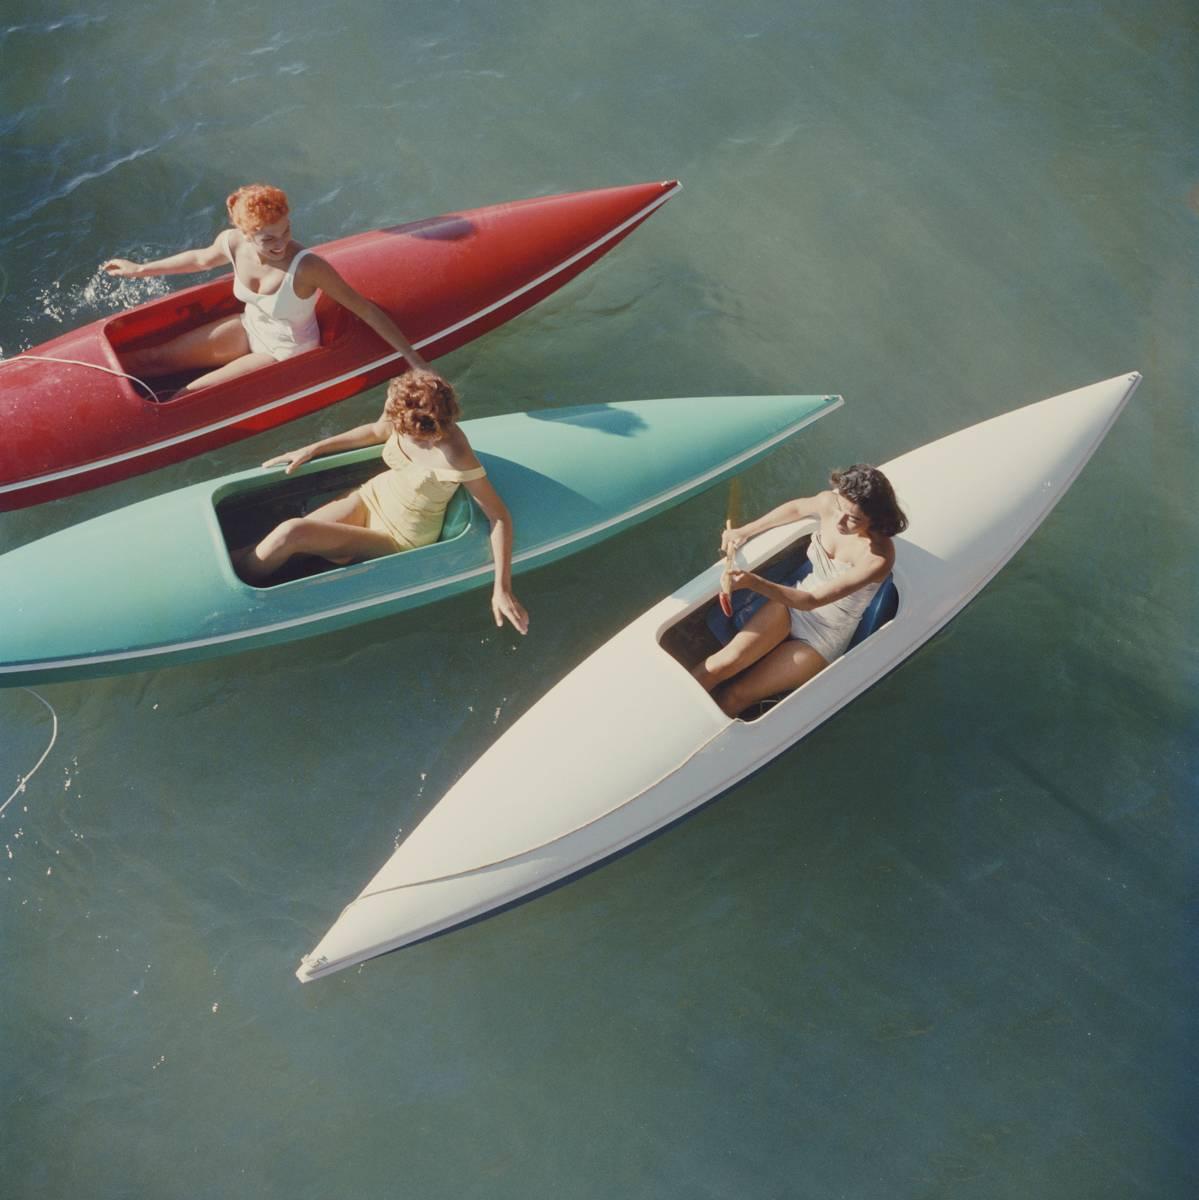 'Lake Tahoe Canoes'  1959 by Slim Aarons
Young women canoeing on the Nevada side of Lake Tahoe, 1959.

This photograph epitomises the travel style and glamour of the period, beautifully documented by Aarons.  

In his words, he photographed